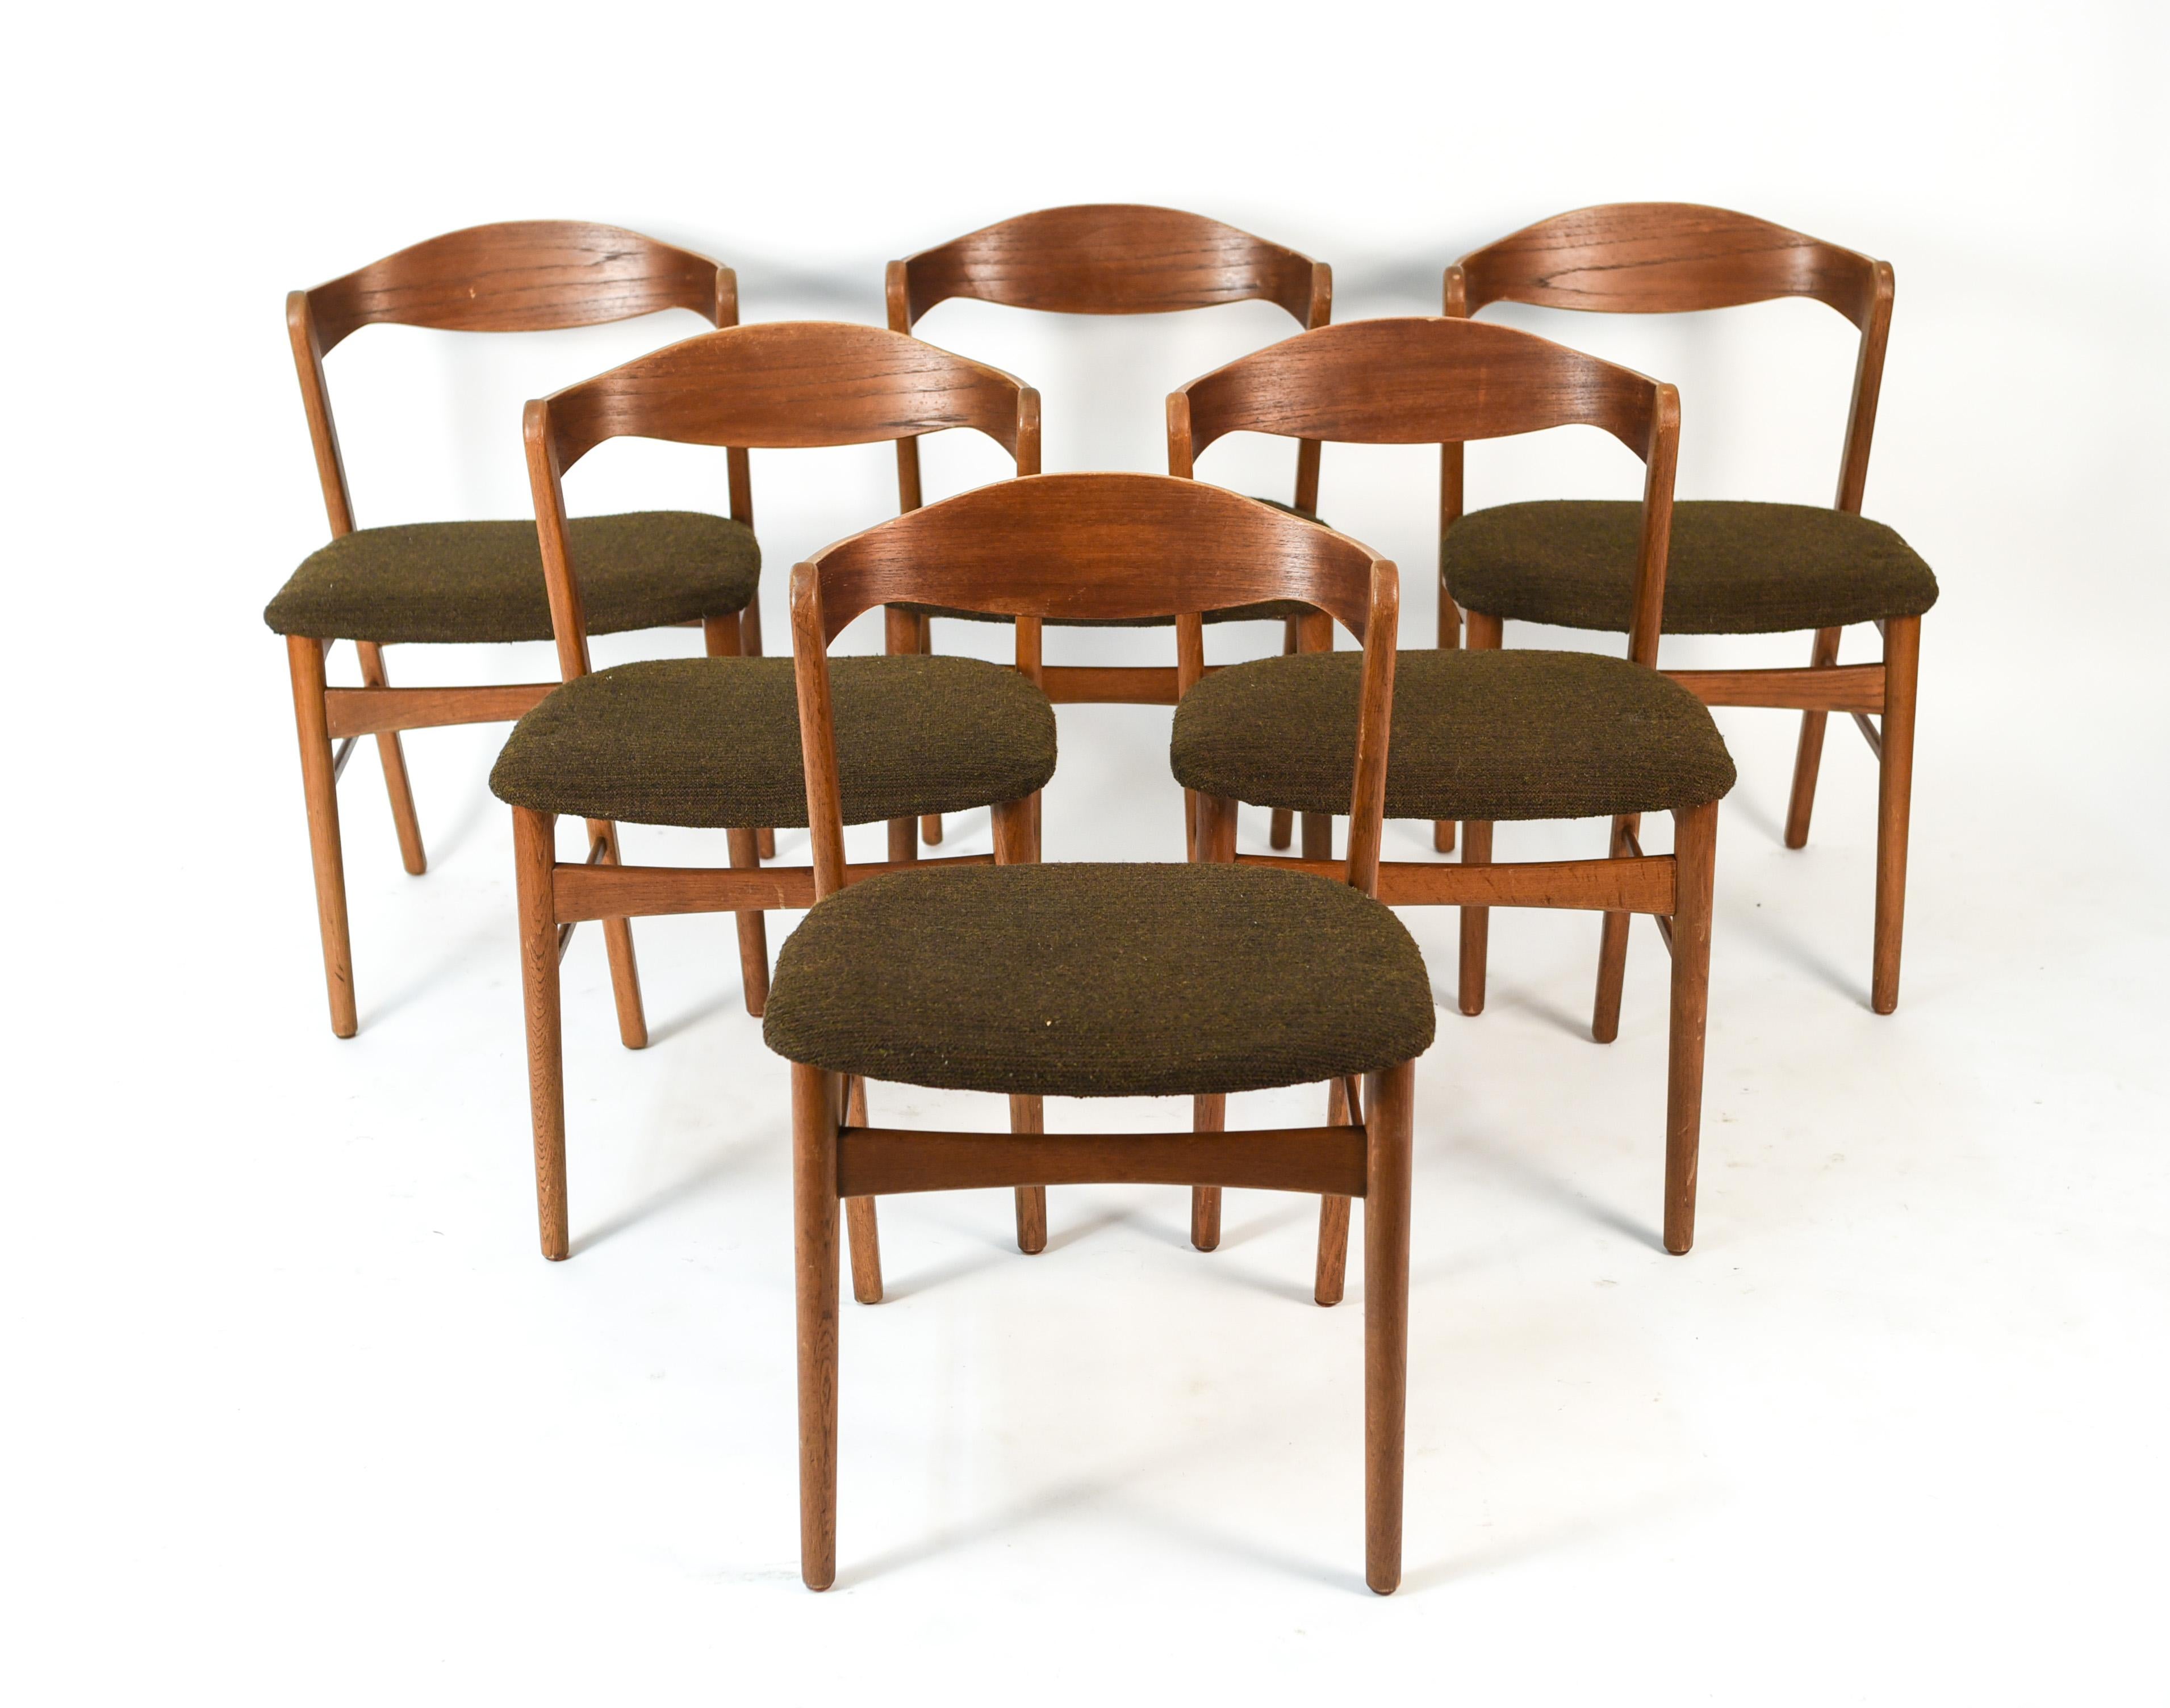 This set of six dining chairs are in the manner of iconic Danish midcentury designer Kai Kristiansen. These chairs encompass his creative use of angles and curves to create unusual, timeless designs.